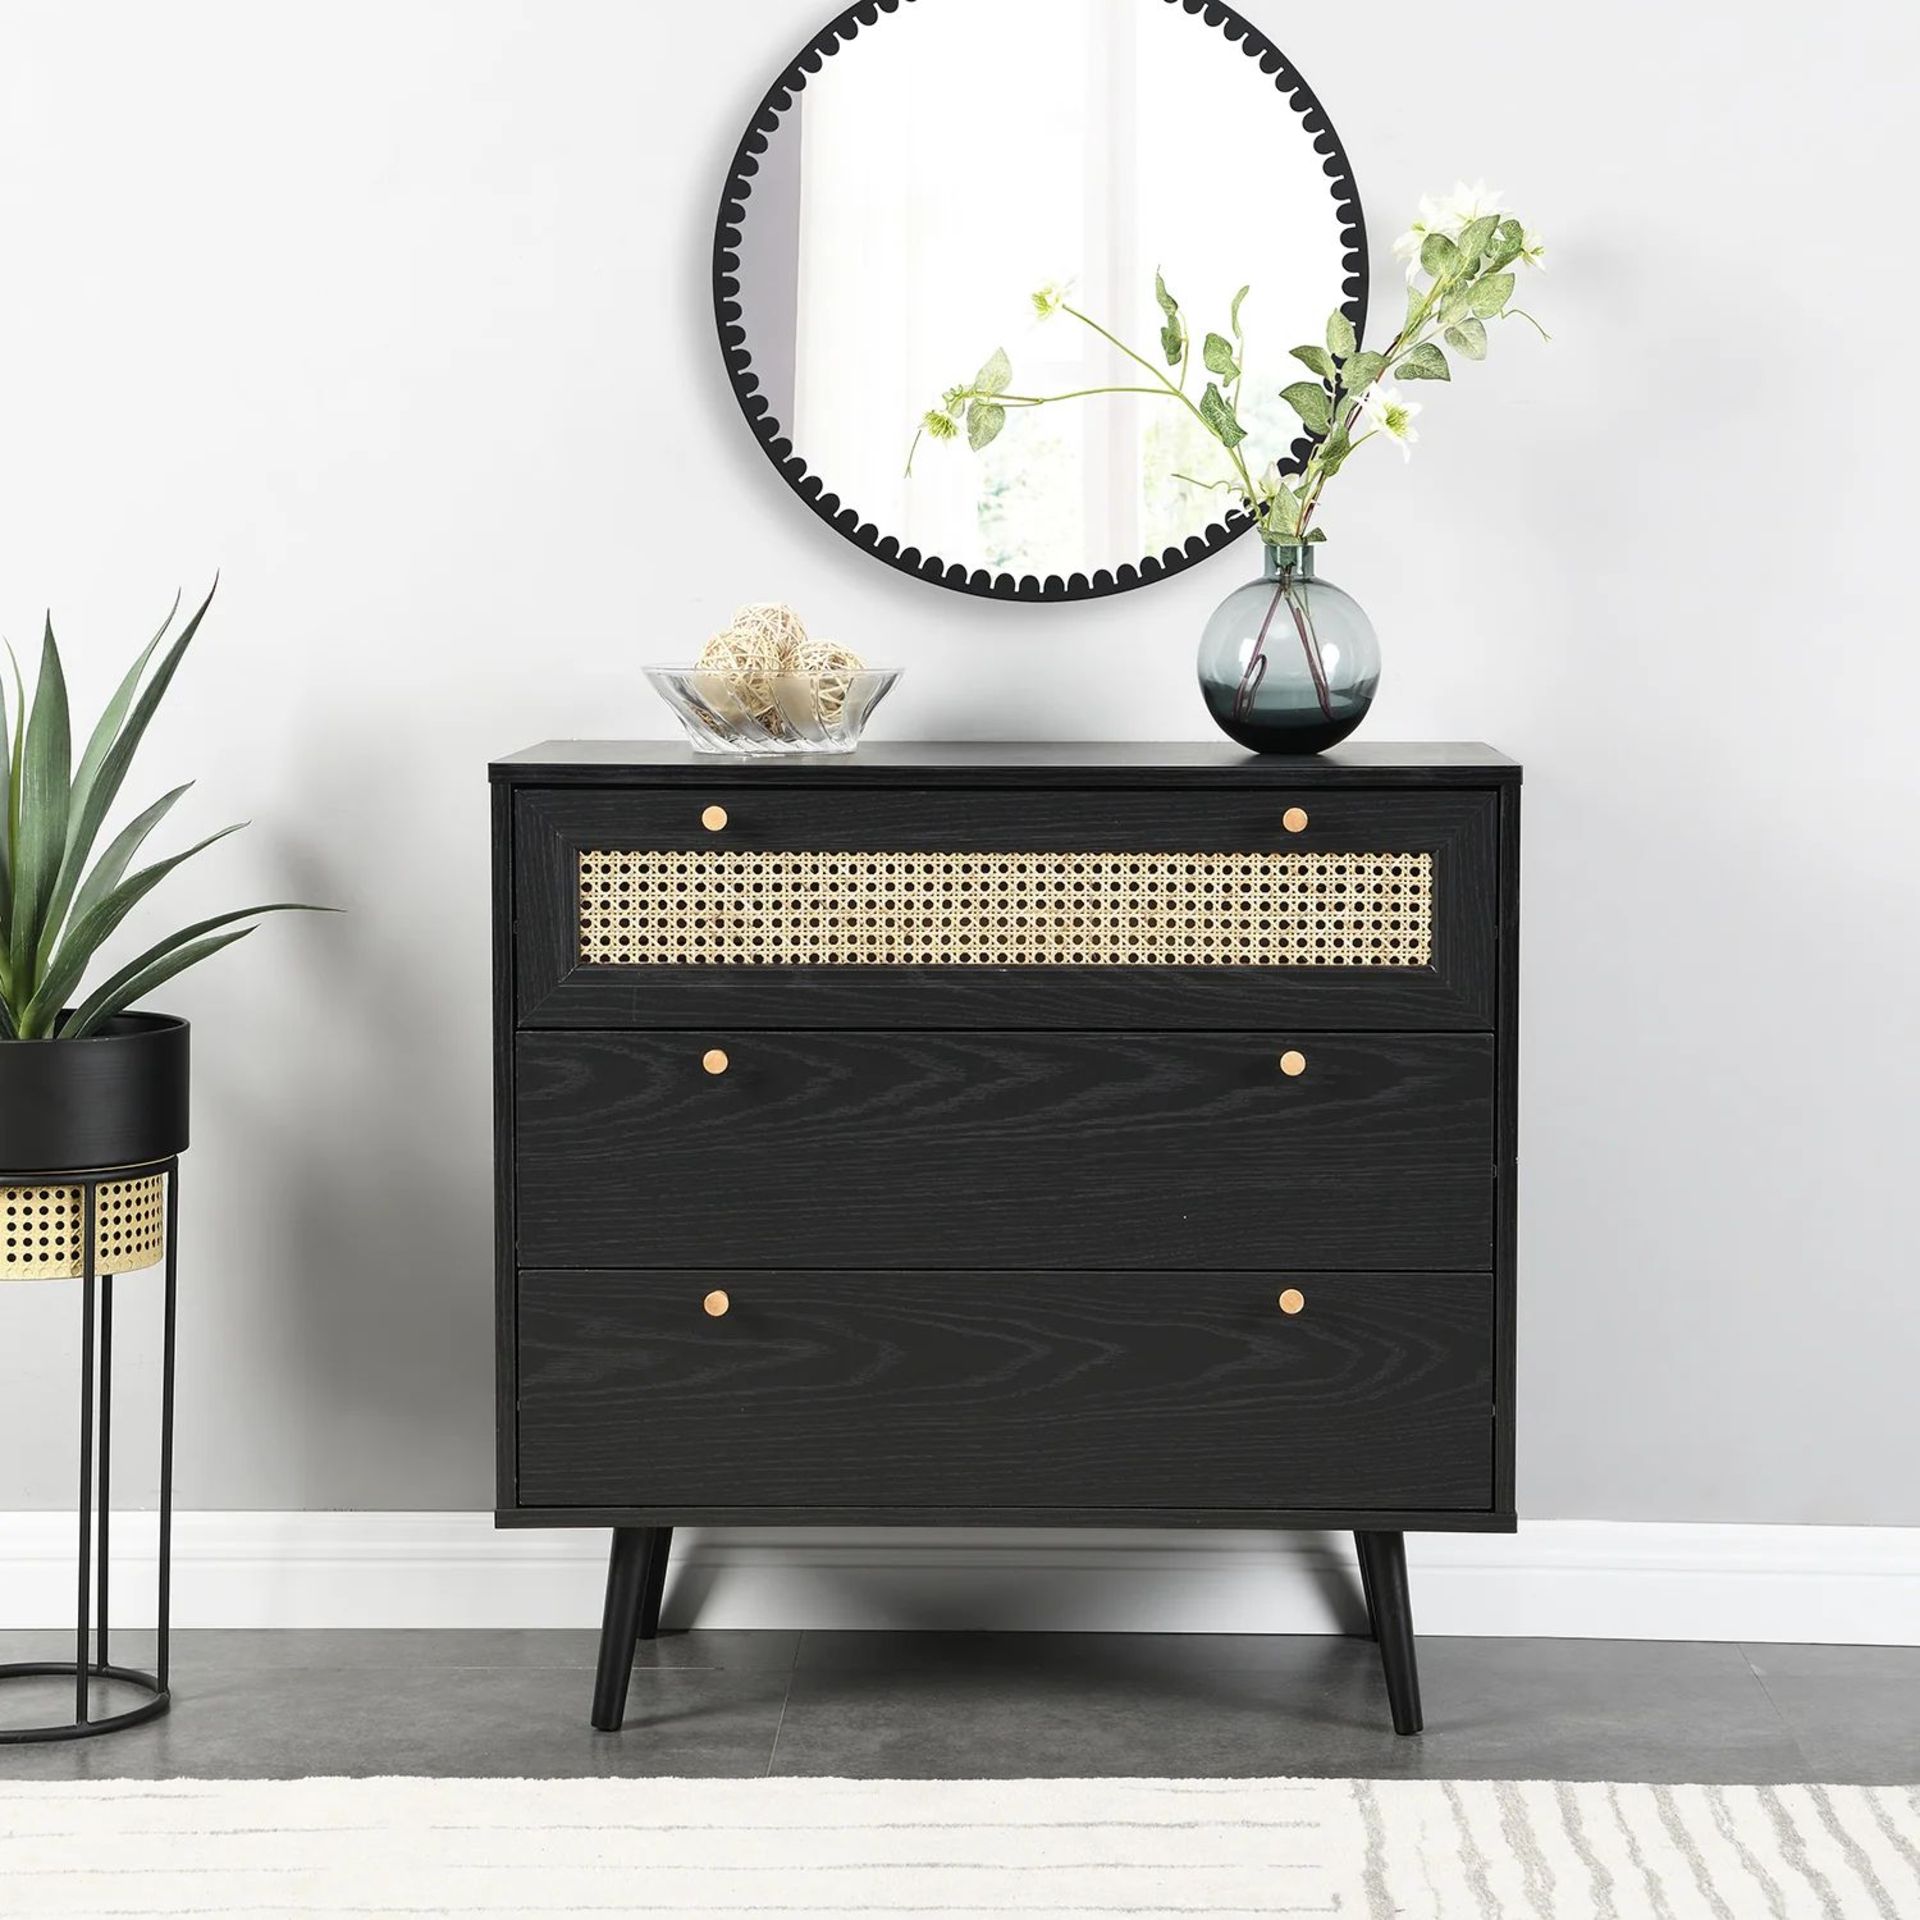 Anya Woven Rattan Chest of 3 Drawer in Black Colour. - ER30. RRP £199.99. Our Anya drawer chest is